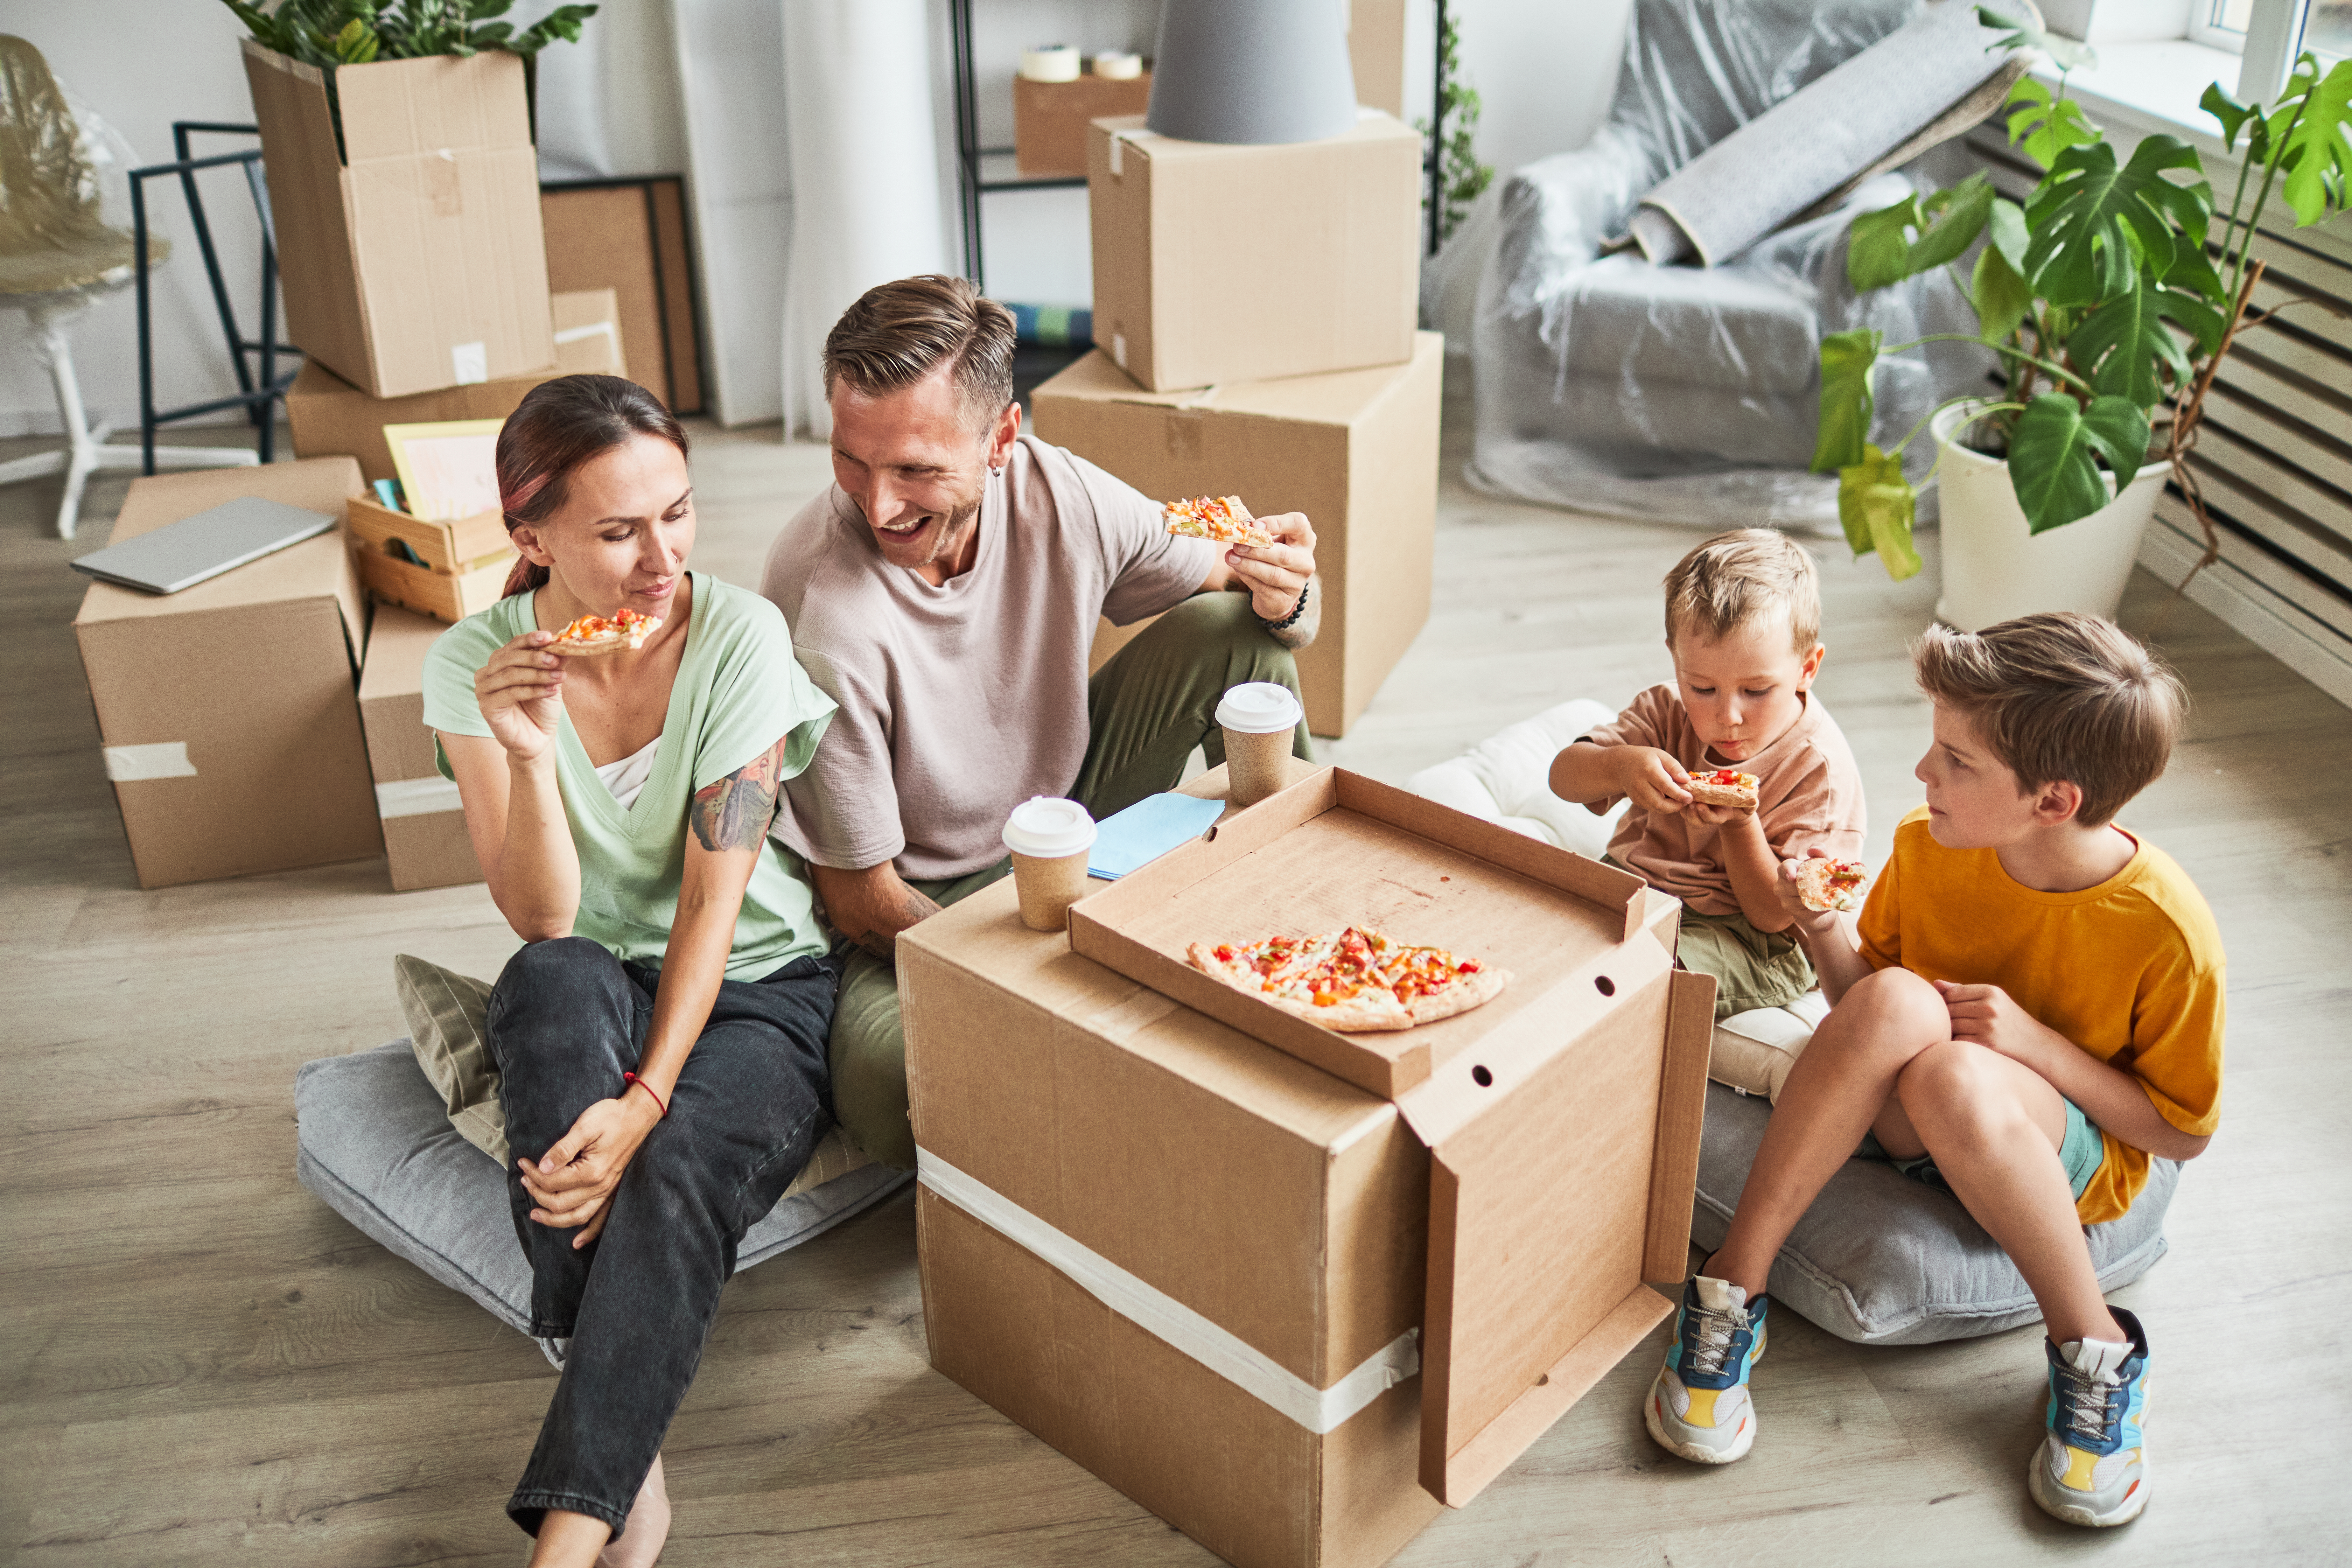 Start living well in a healthy, move-in ready home from Woodside